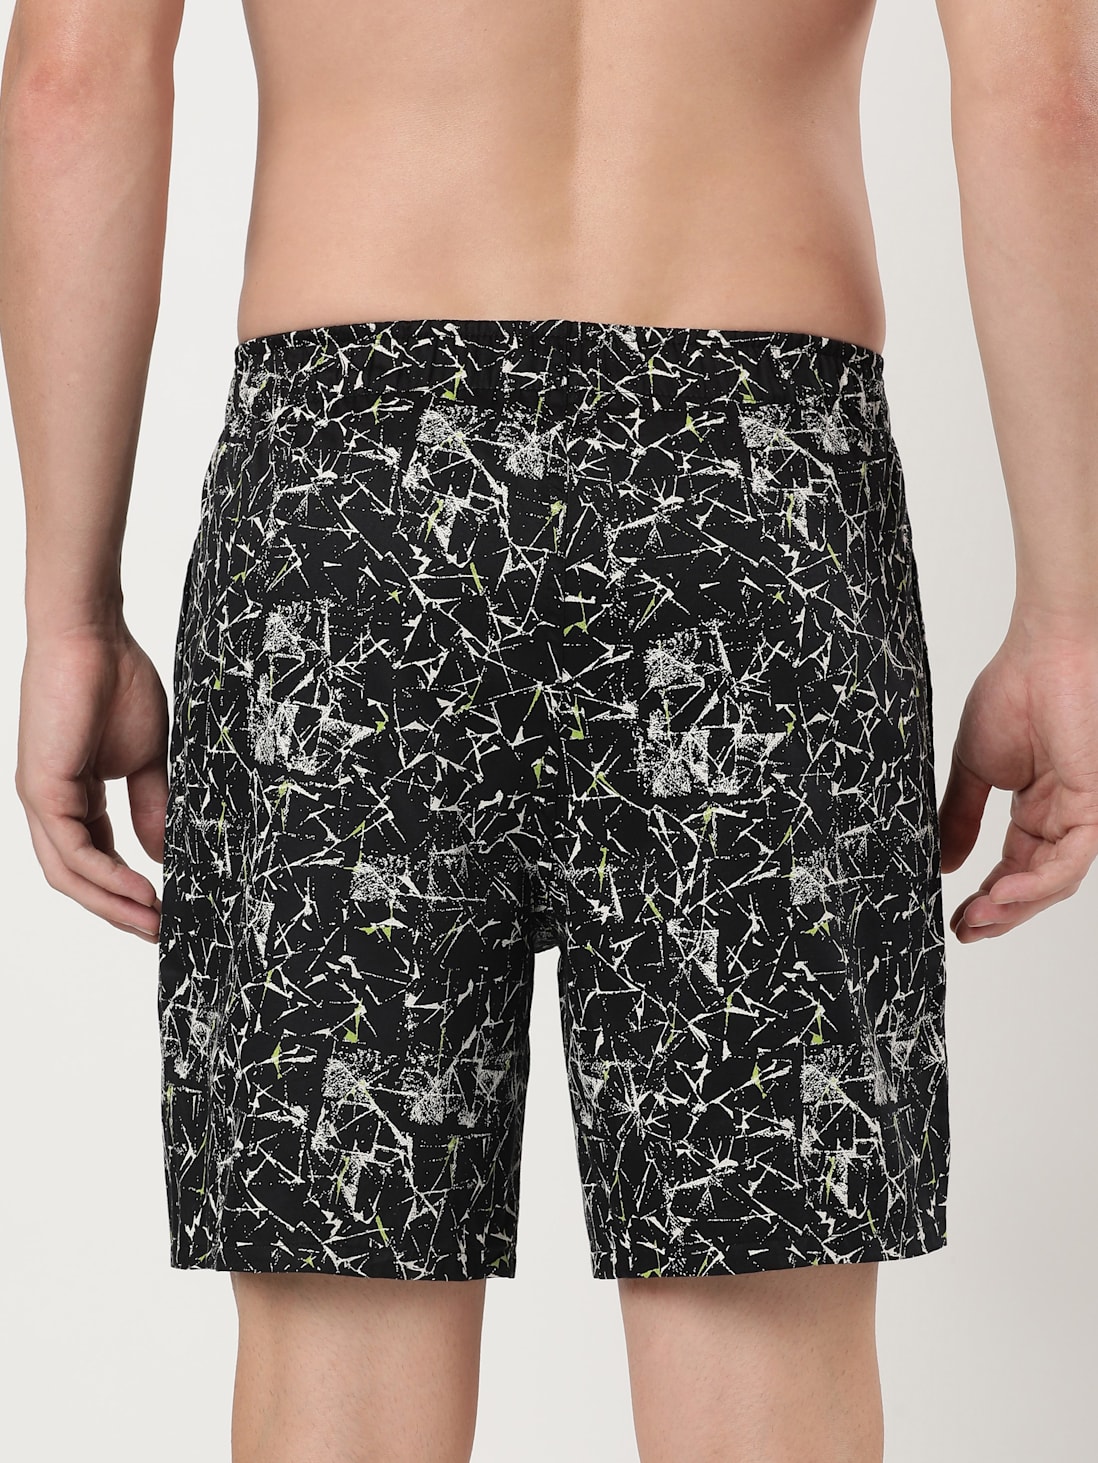 Buy Men's Super Combed Cotton Satin Weave Printed Boxer Shorts with ...